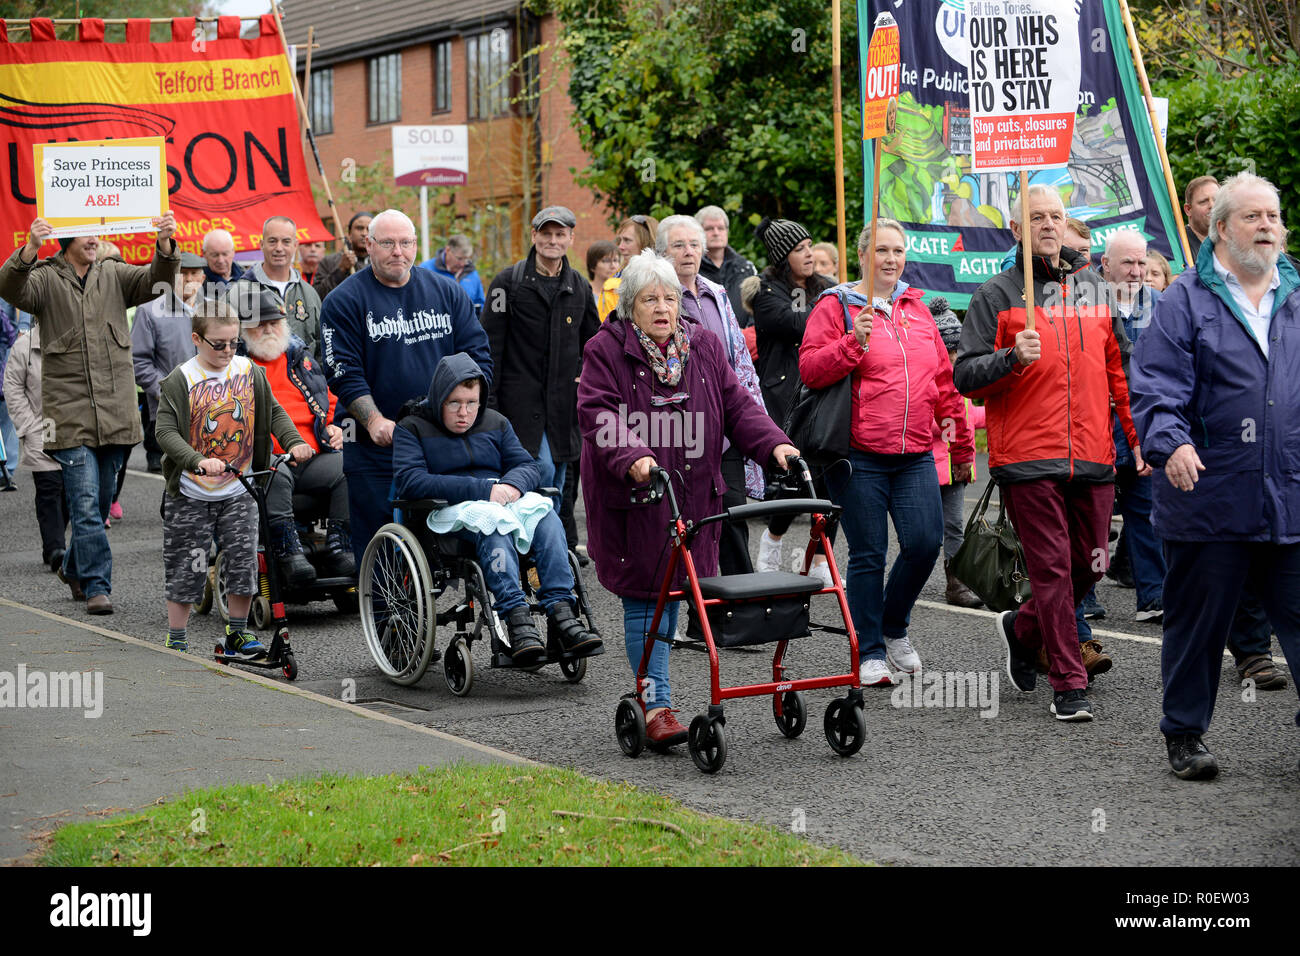 Shropshire, UK. 4th Nov 2018. Thousand of people protesting against the planned closure of the Princess Royal Hospital Accident & Emergency department in Telford Credit: David Bagnall/Alamy Live News Stock Photo